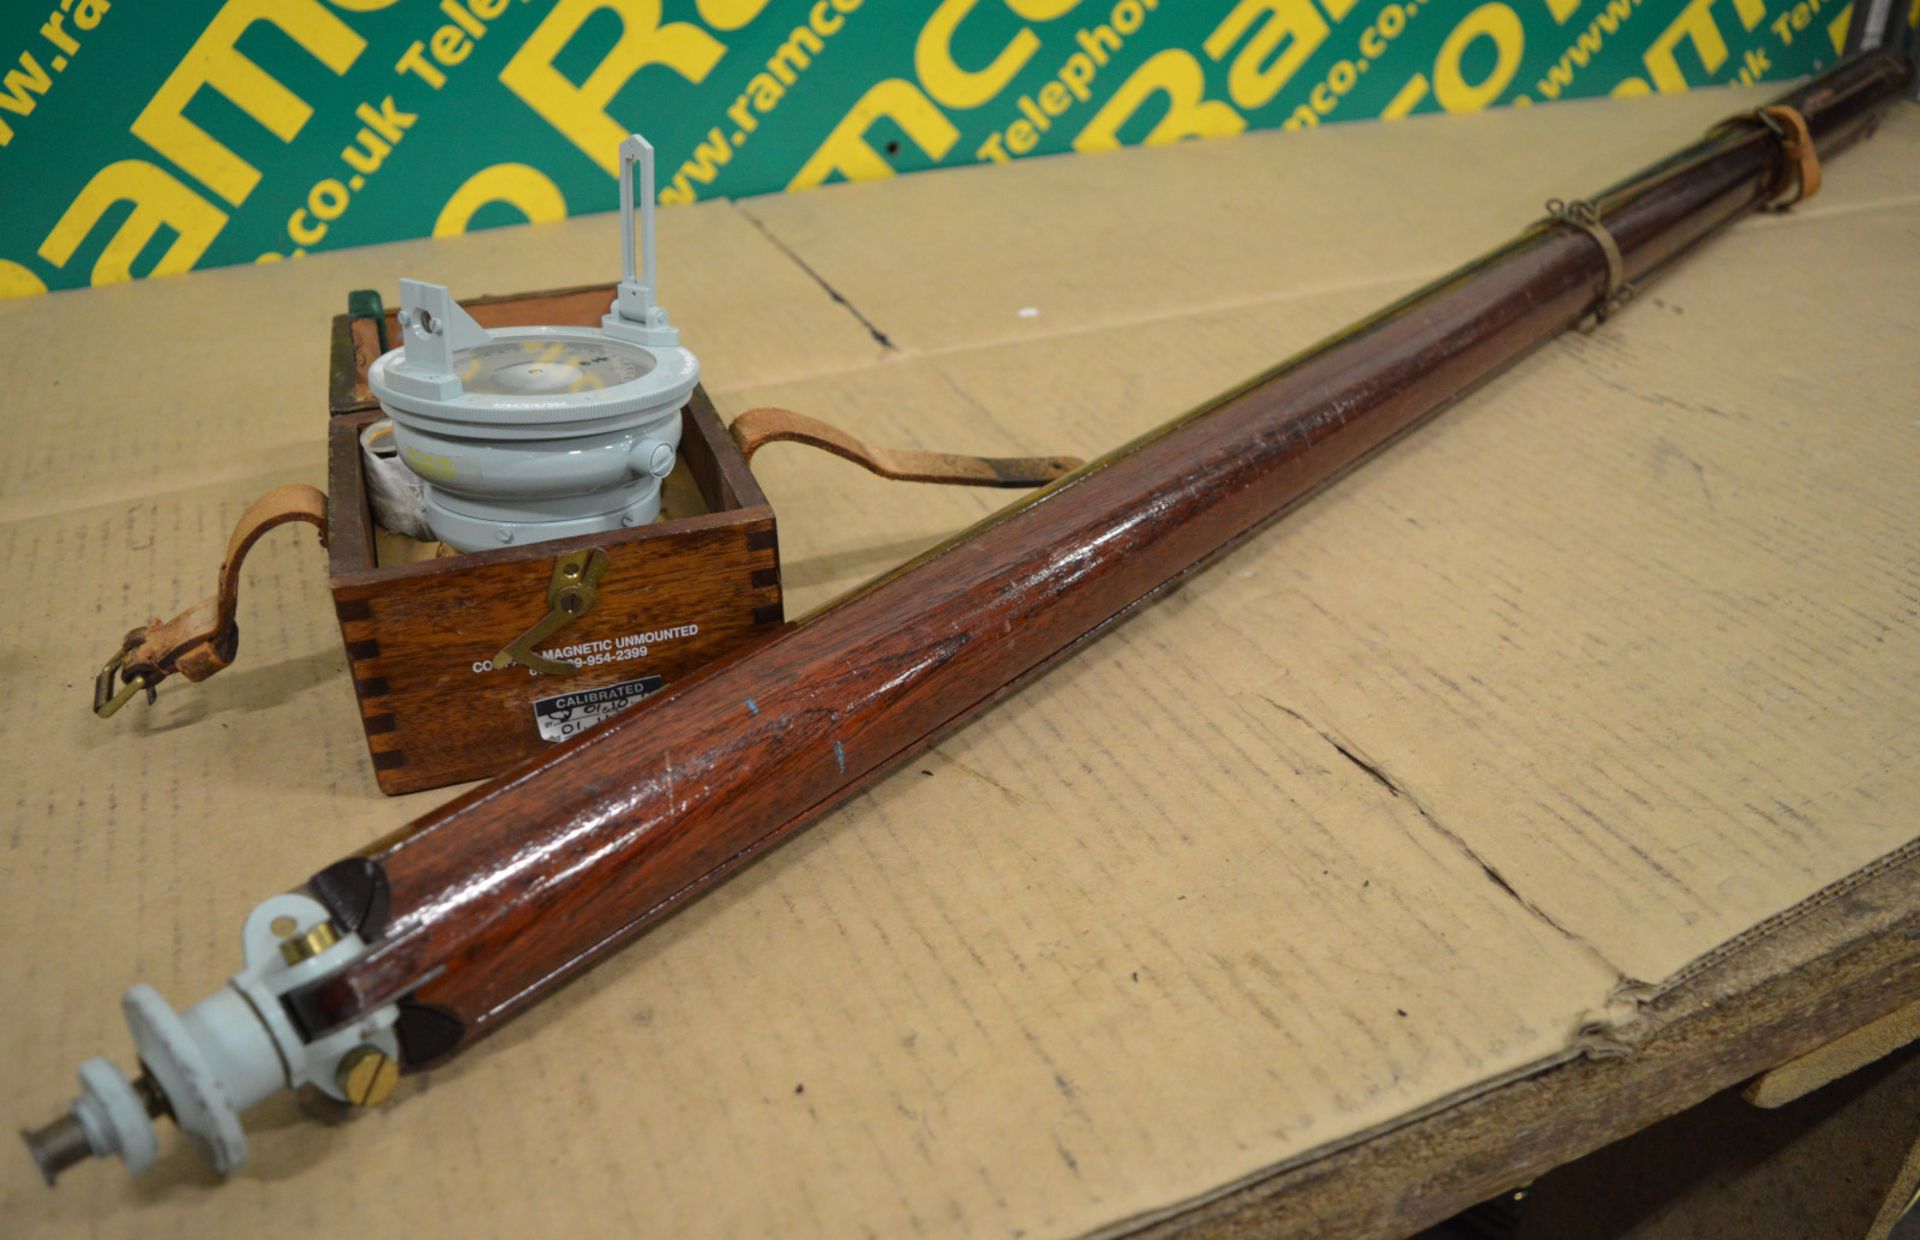 Mahogany Tripod with detachable Magnetic Compass in Wooden Case.